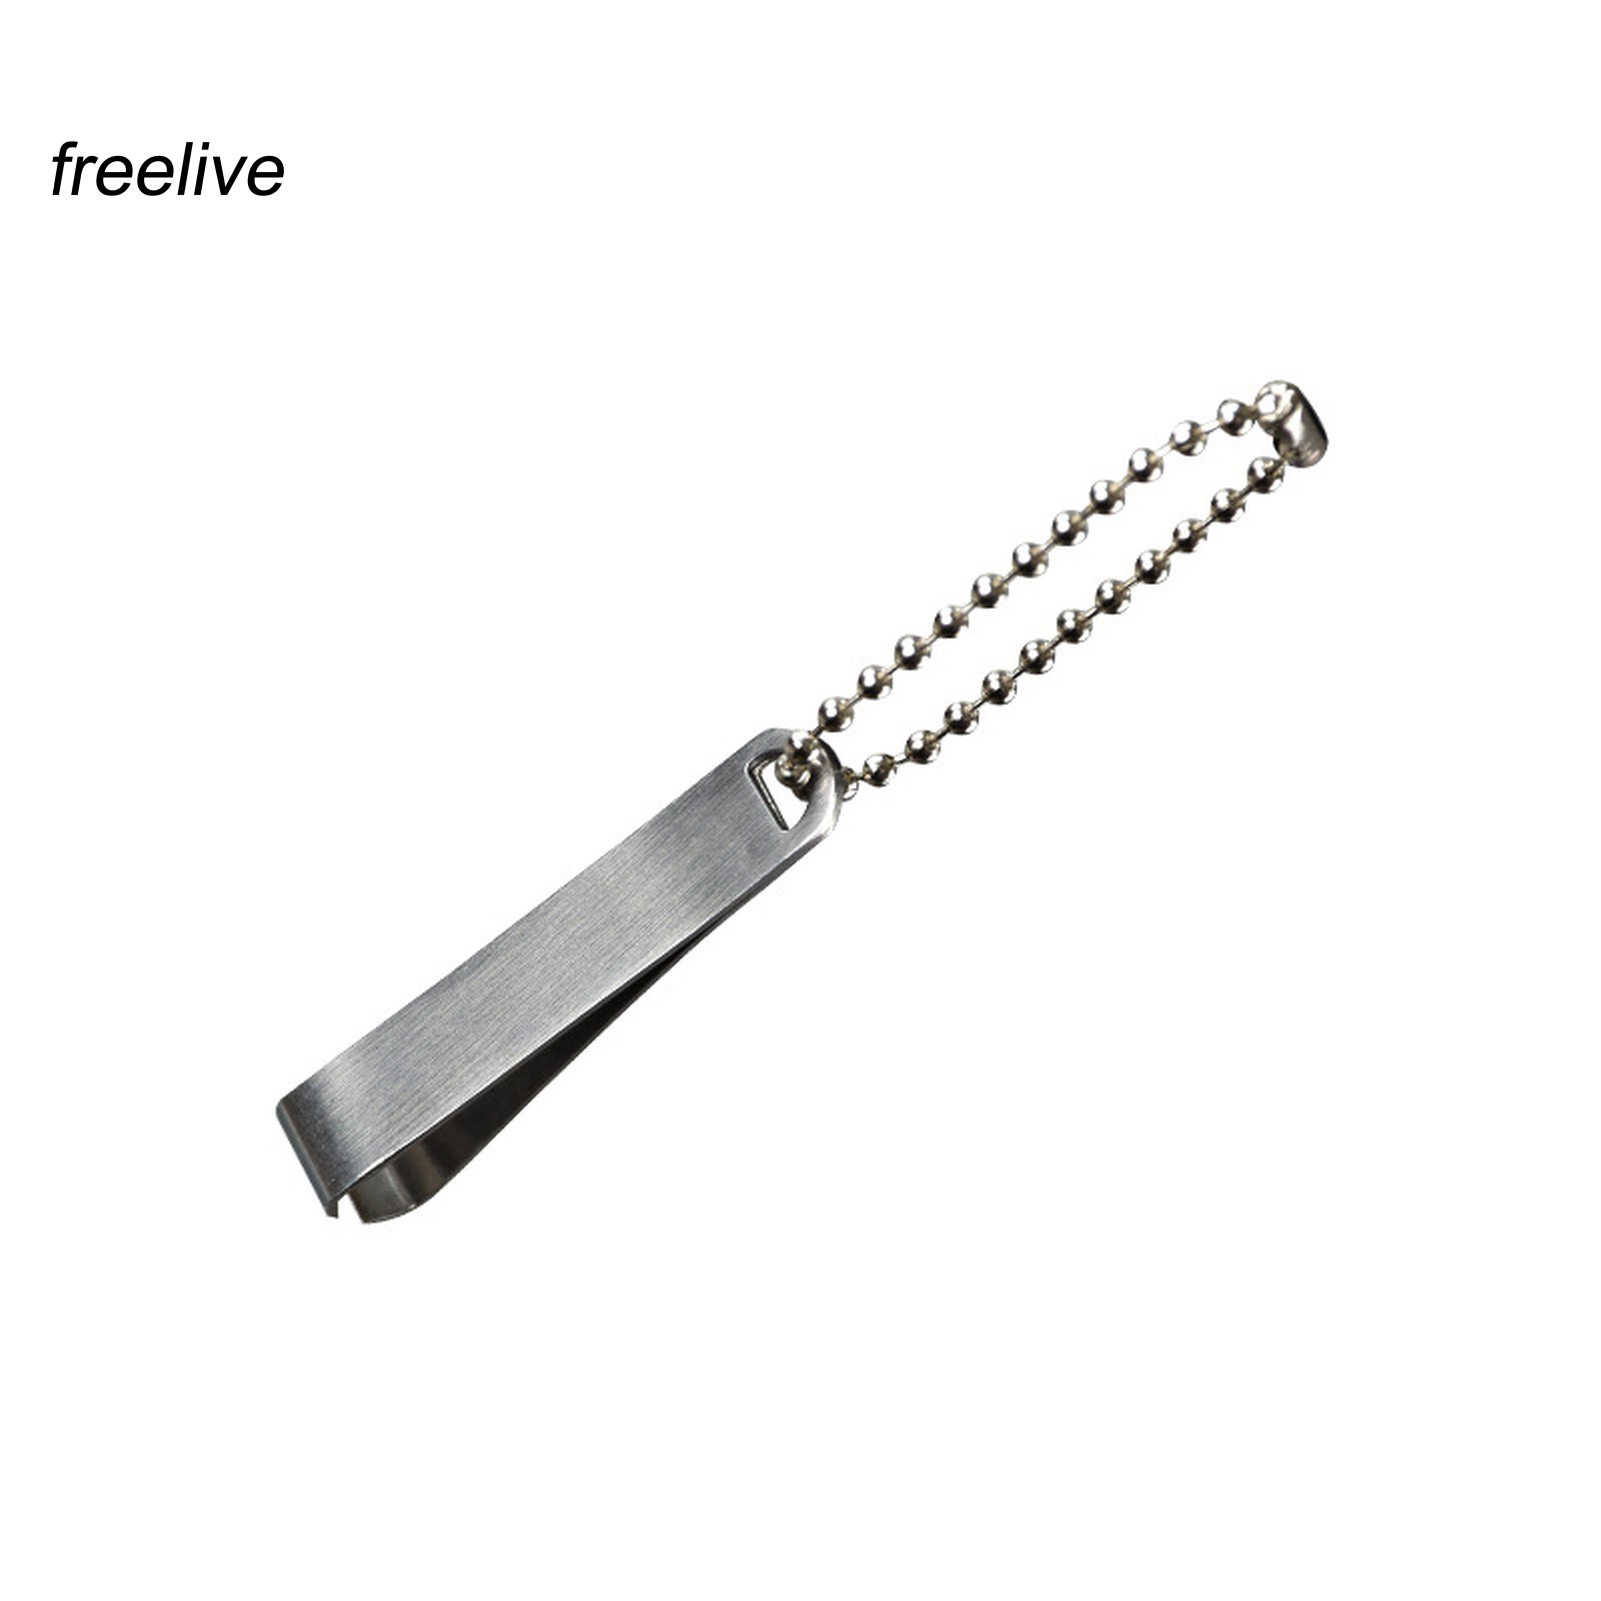 FRE| freelive Take care of the pet Durable Fishing Piler Scissor Multipurpose Fishing Line Scissor Easy to Use for Angling